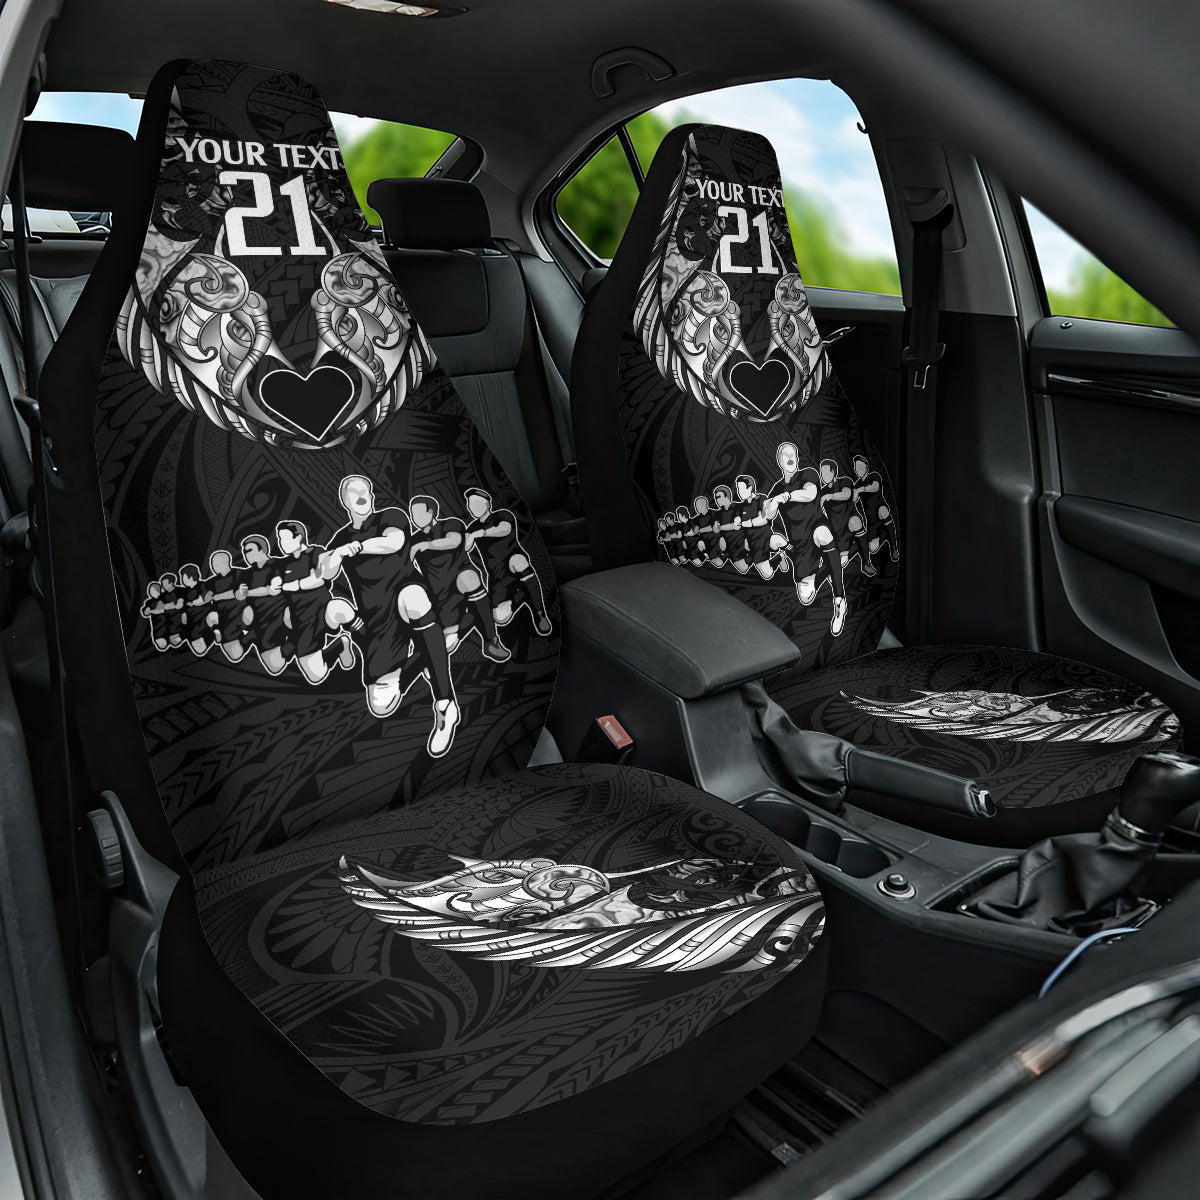 Custom New Zealand Rugby Car Seat Cover Black Haka Dance With NZ Champions History LT9 One Size Black - Polynesian Pride